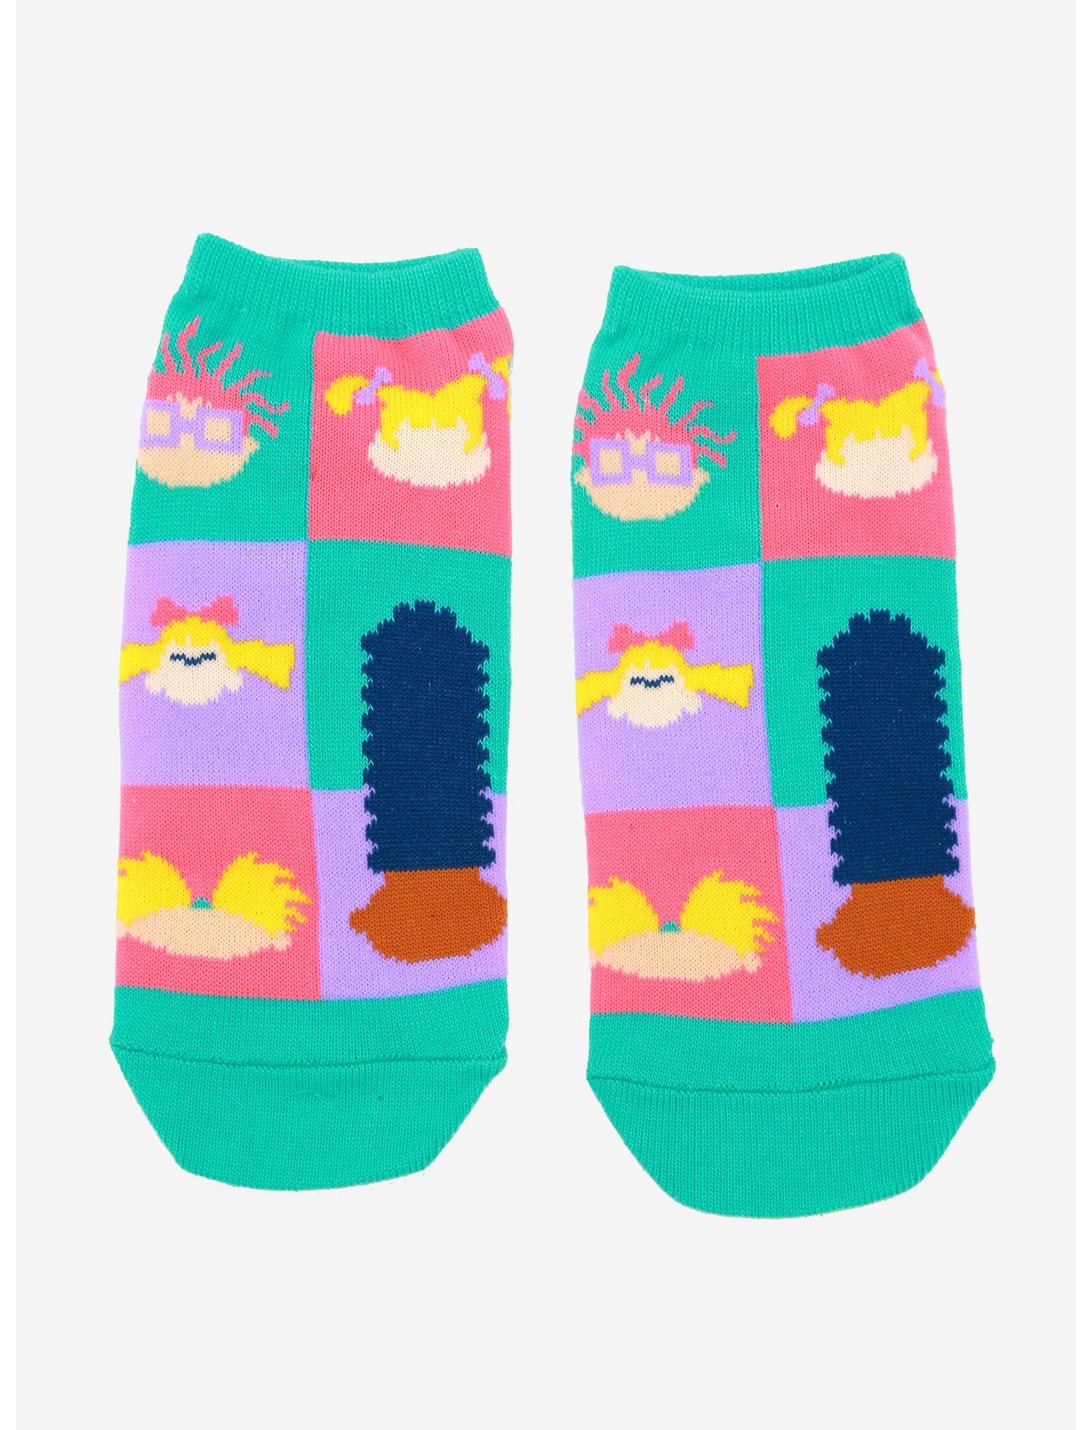 Nickelodeon Characters Silhouettes No-Show Socks | Hot Topic